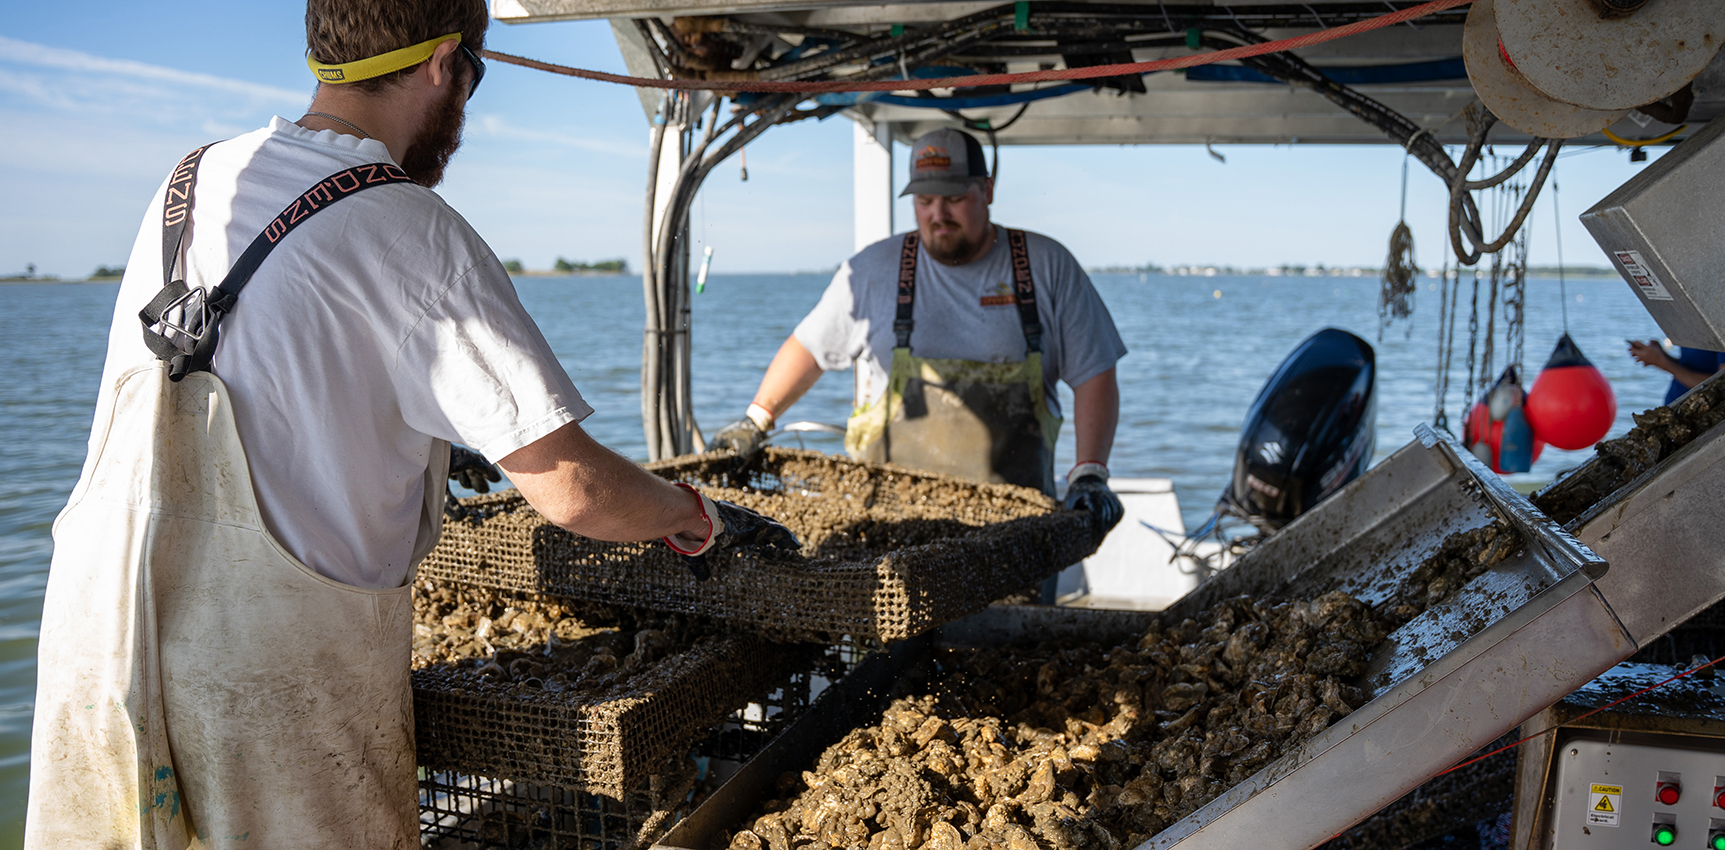 Washing and sorting oysters on the boat have helped Madhouse Oysters save time and effort. Photo, Logan Bilbrough/UME MDSG